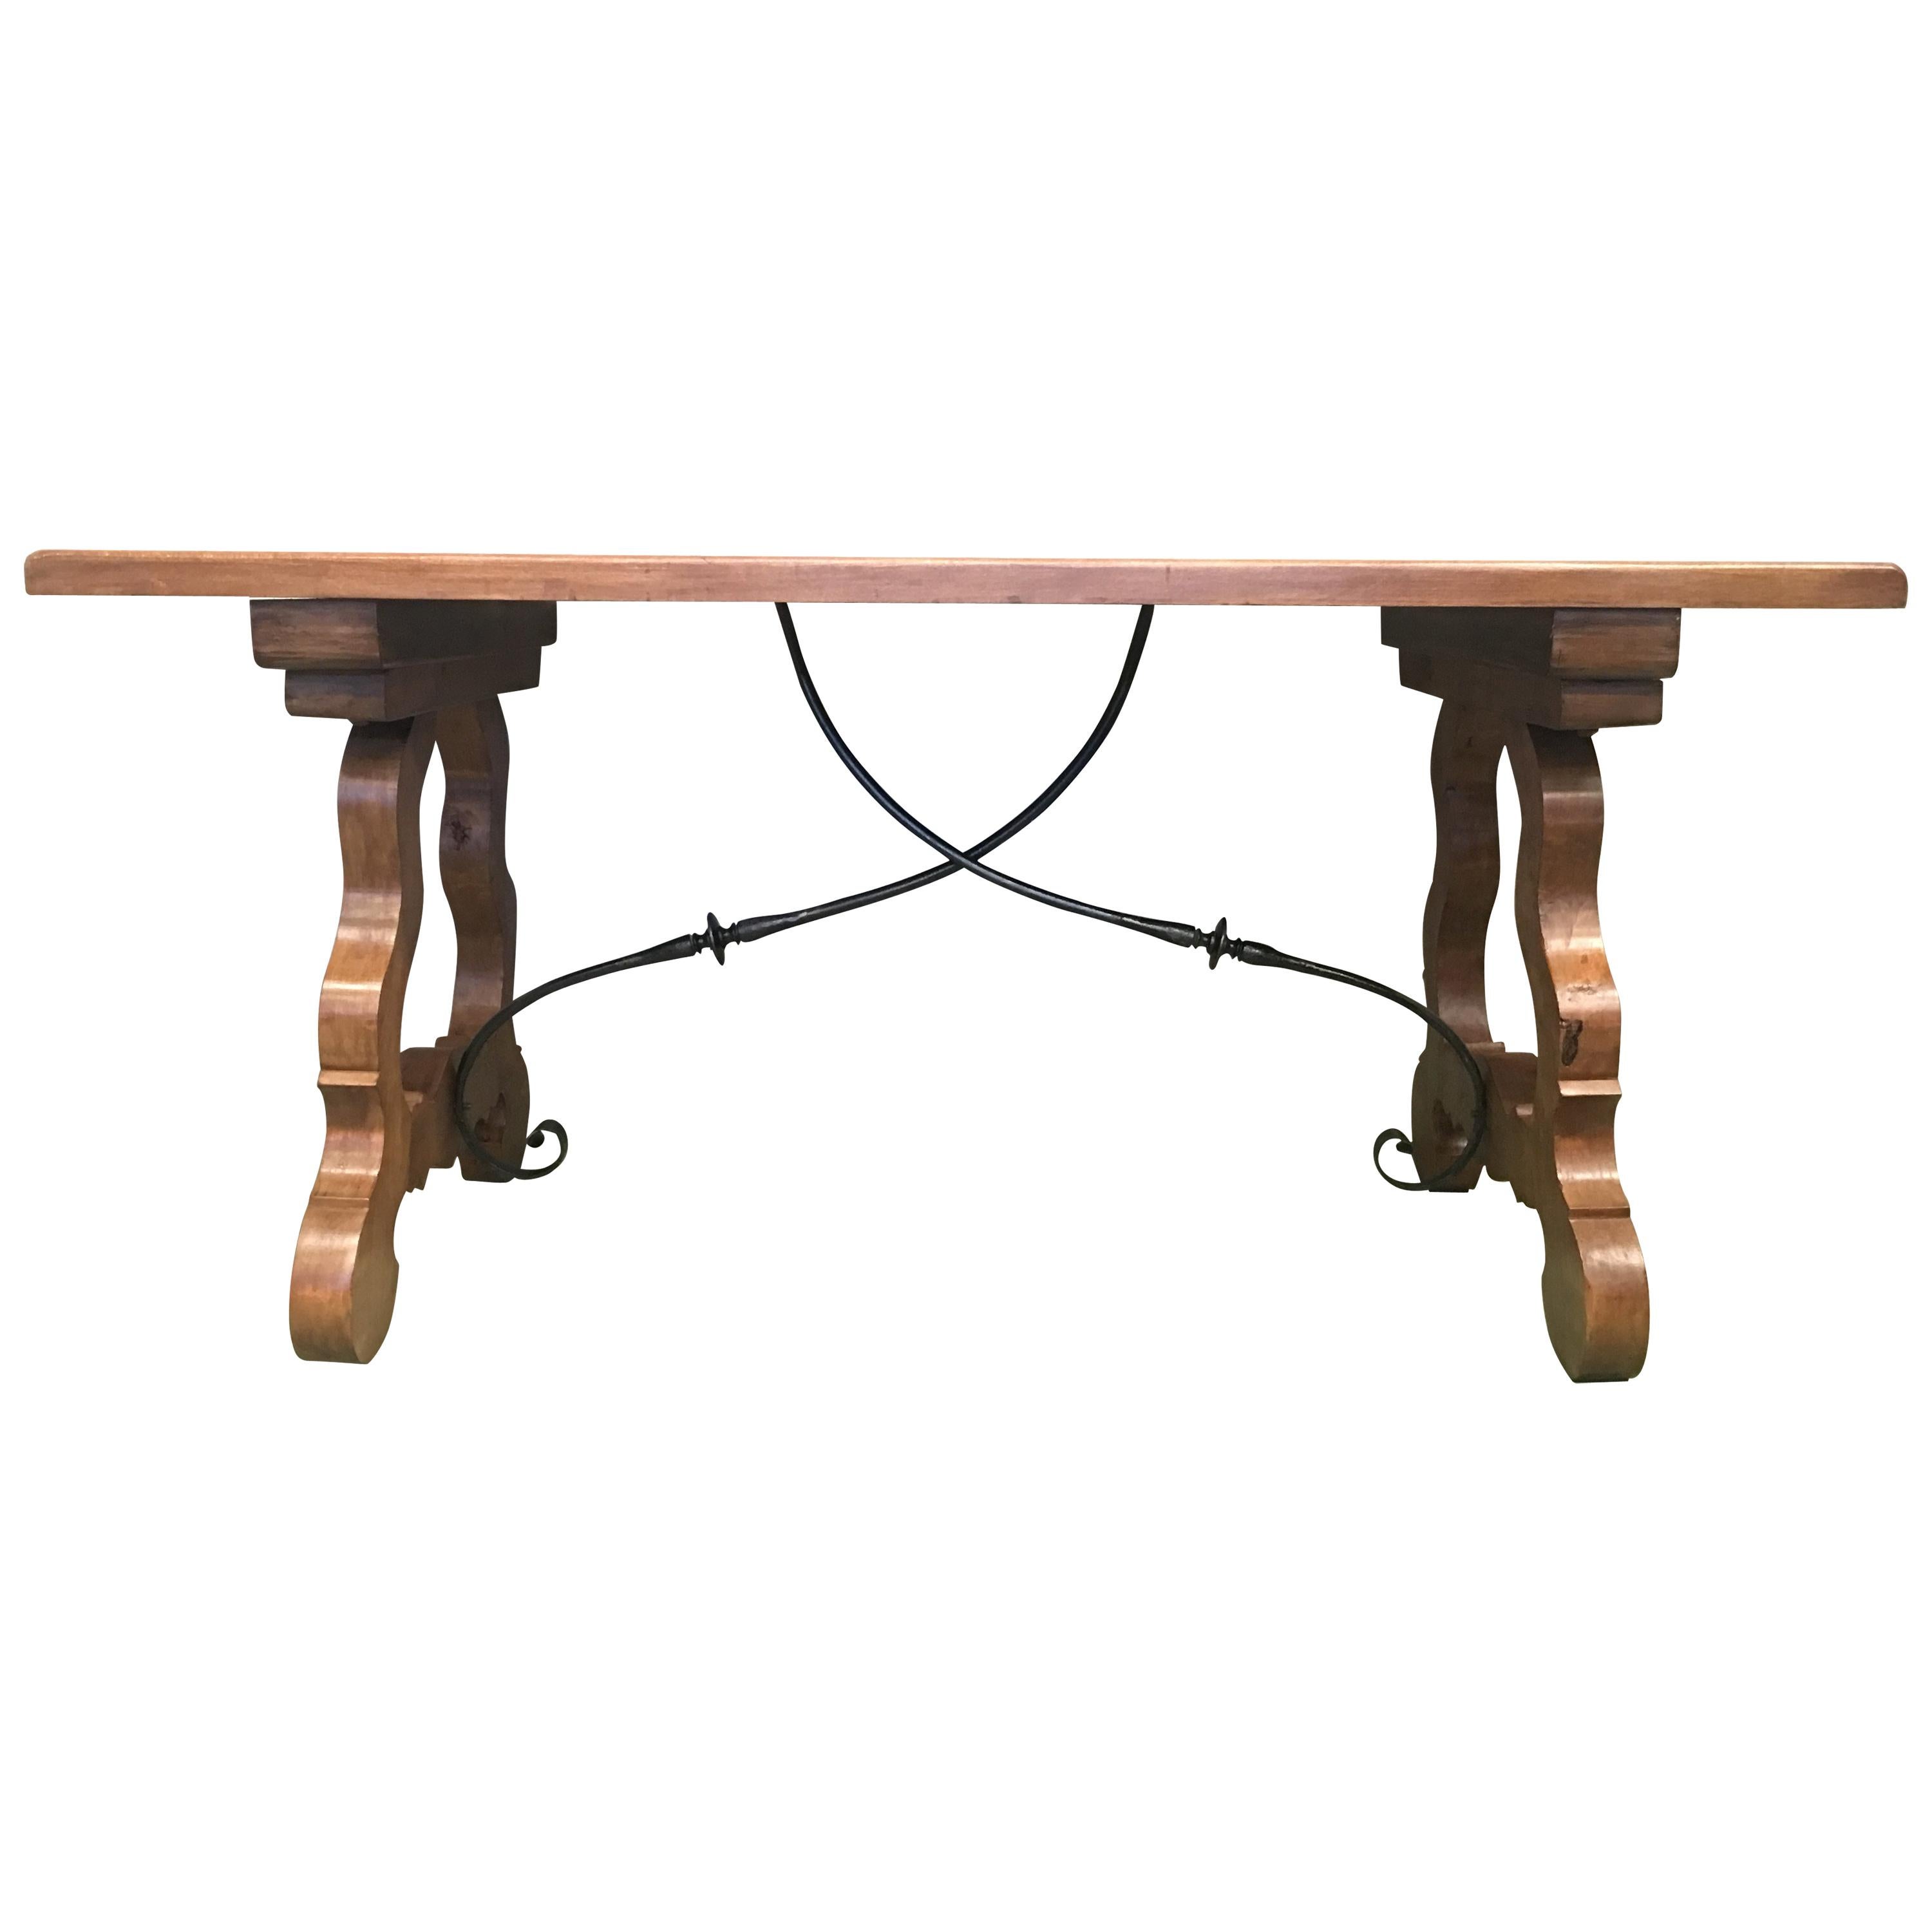 20th century Spanish walnut desk or farm table with iron stretchers
Elegant antique walnut farm table from Spain; crafted circa 1920, the trestle table features a rectangular top over two carved and shaped lyre-form legs joined by forged iron